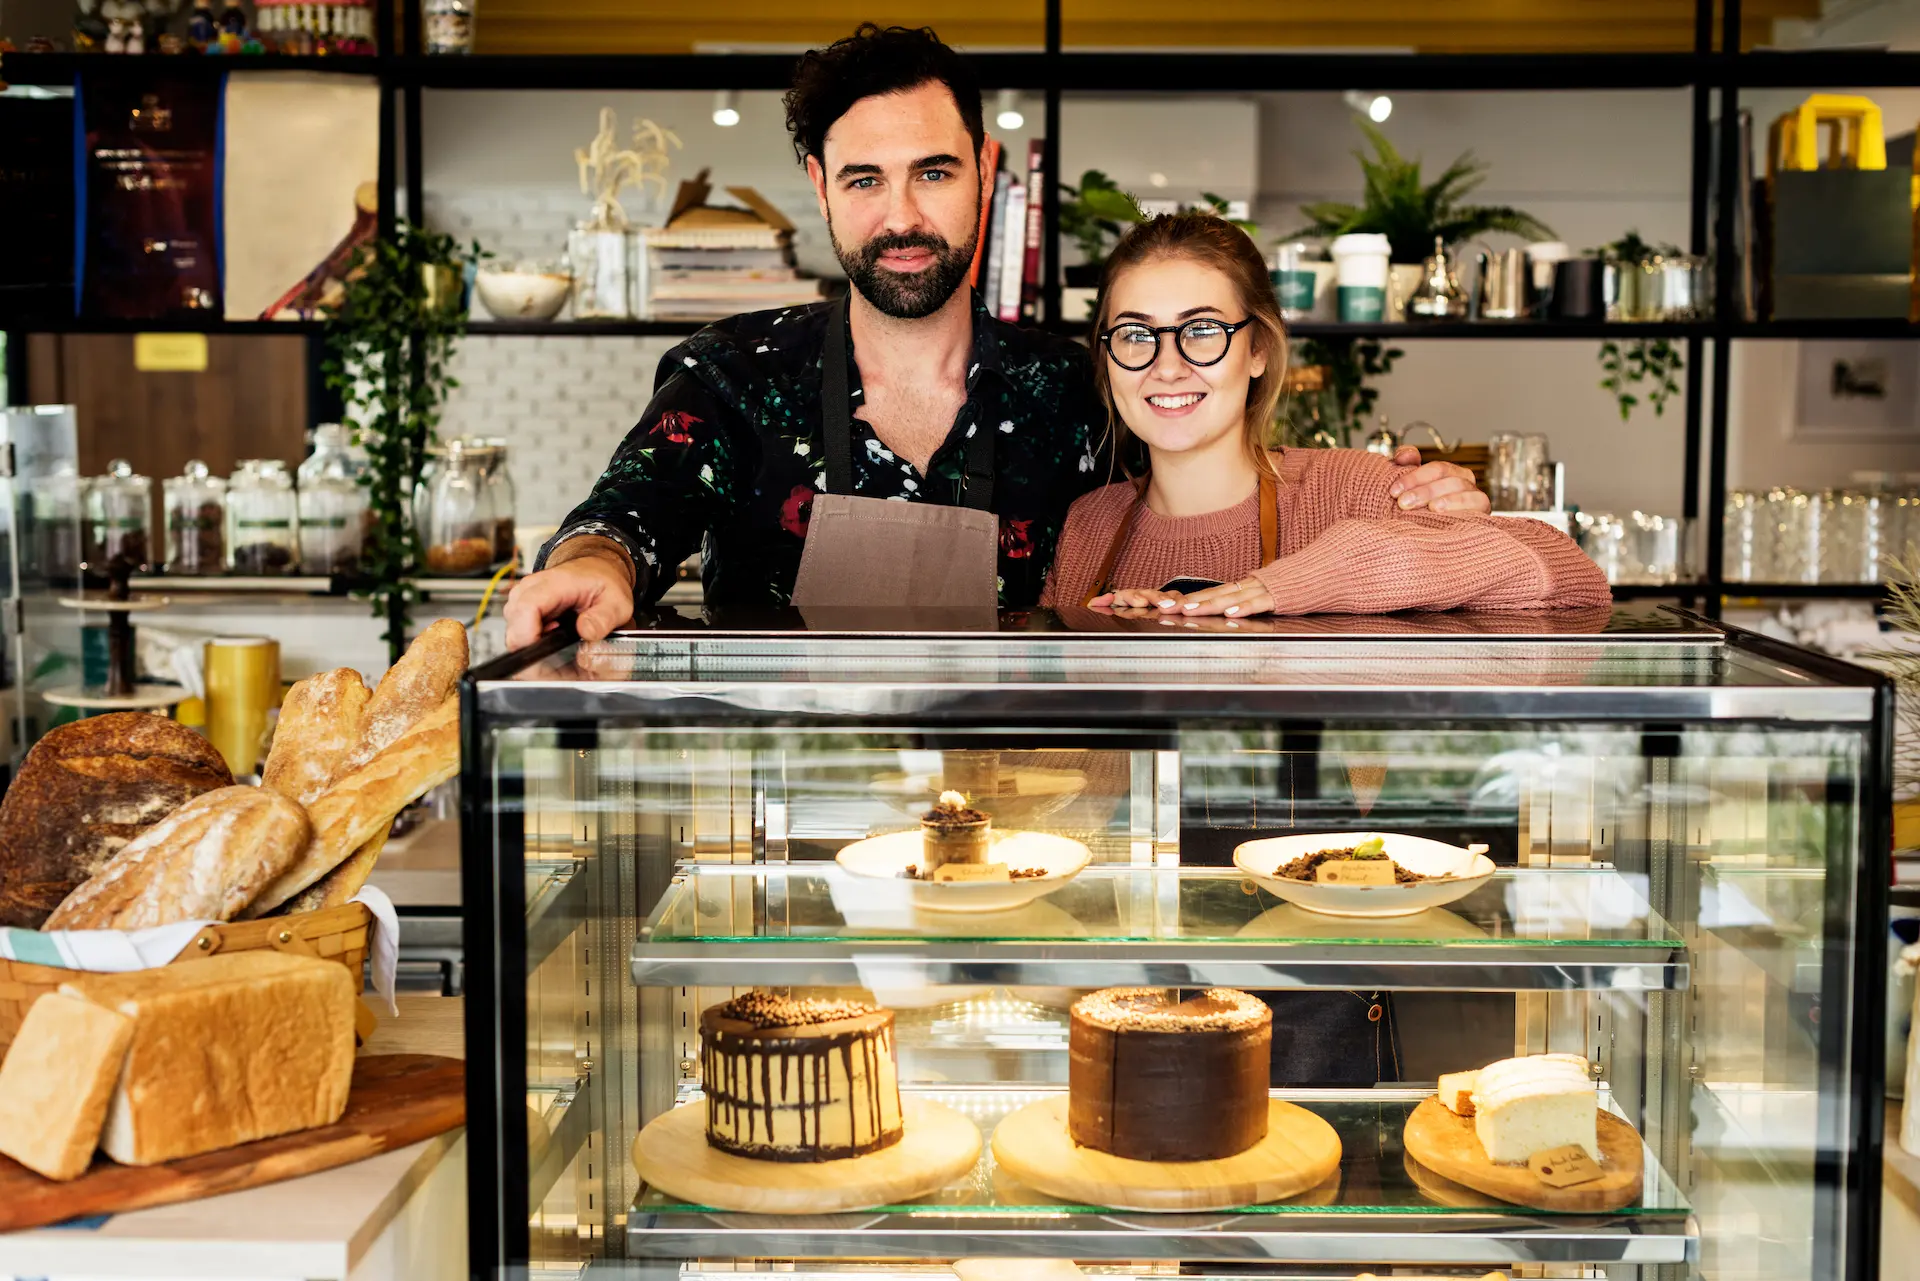 Bakery business owners standing behind a showcase of their decadent desserts and rustics breads